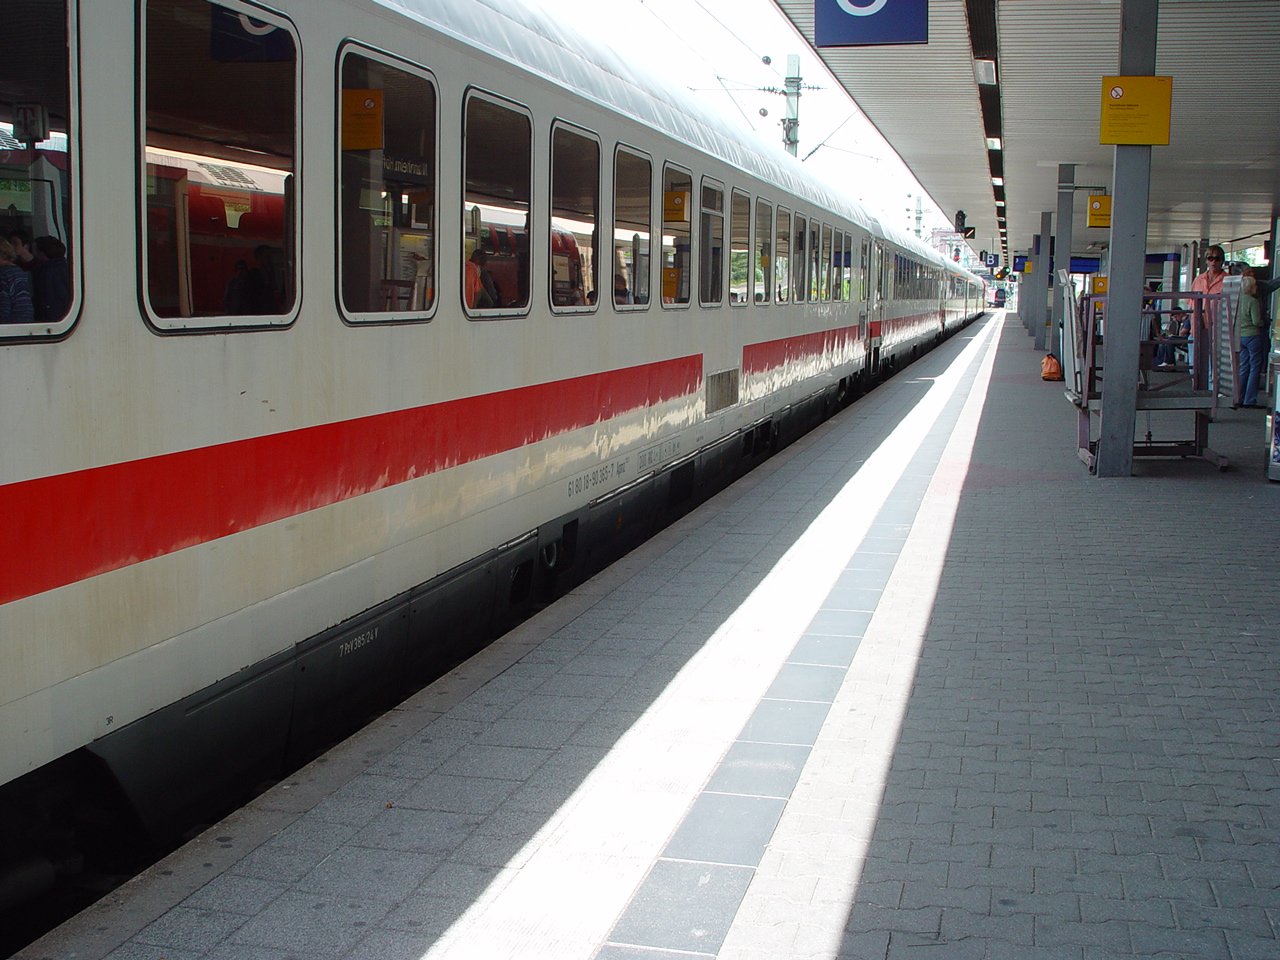 a train is pulled up to the station with people boarding